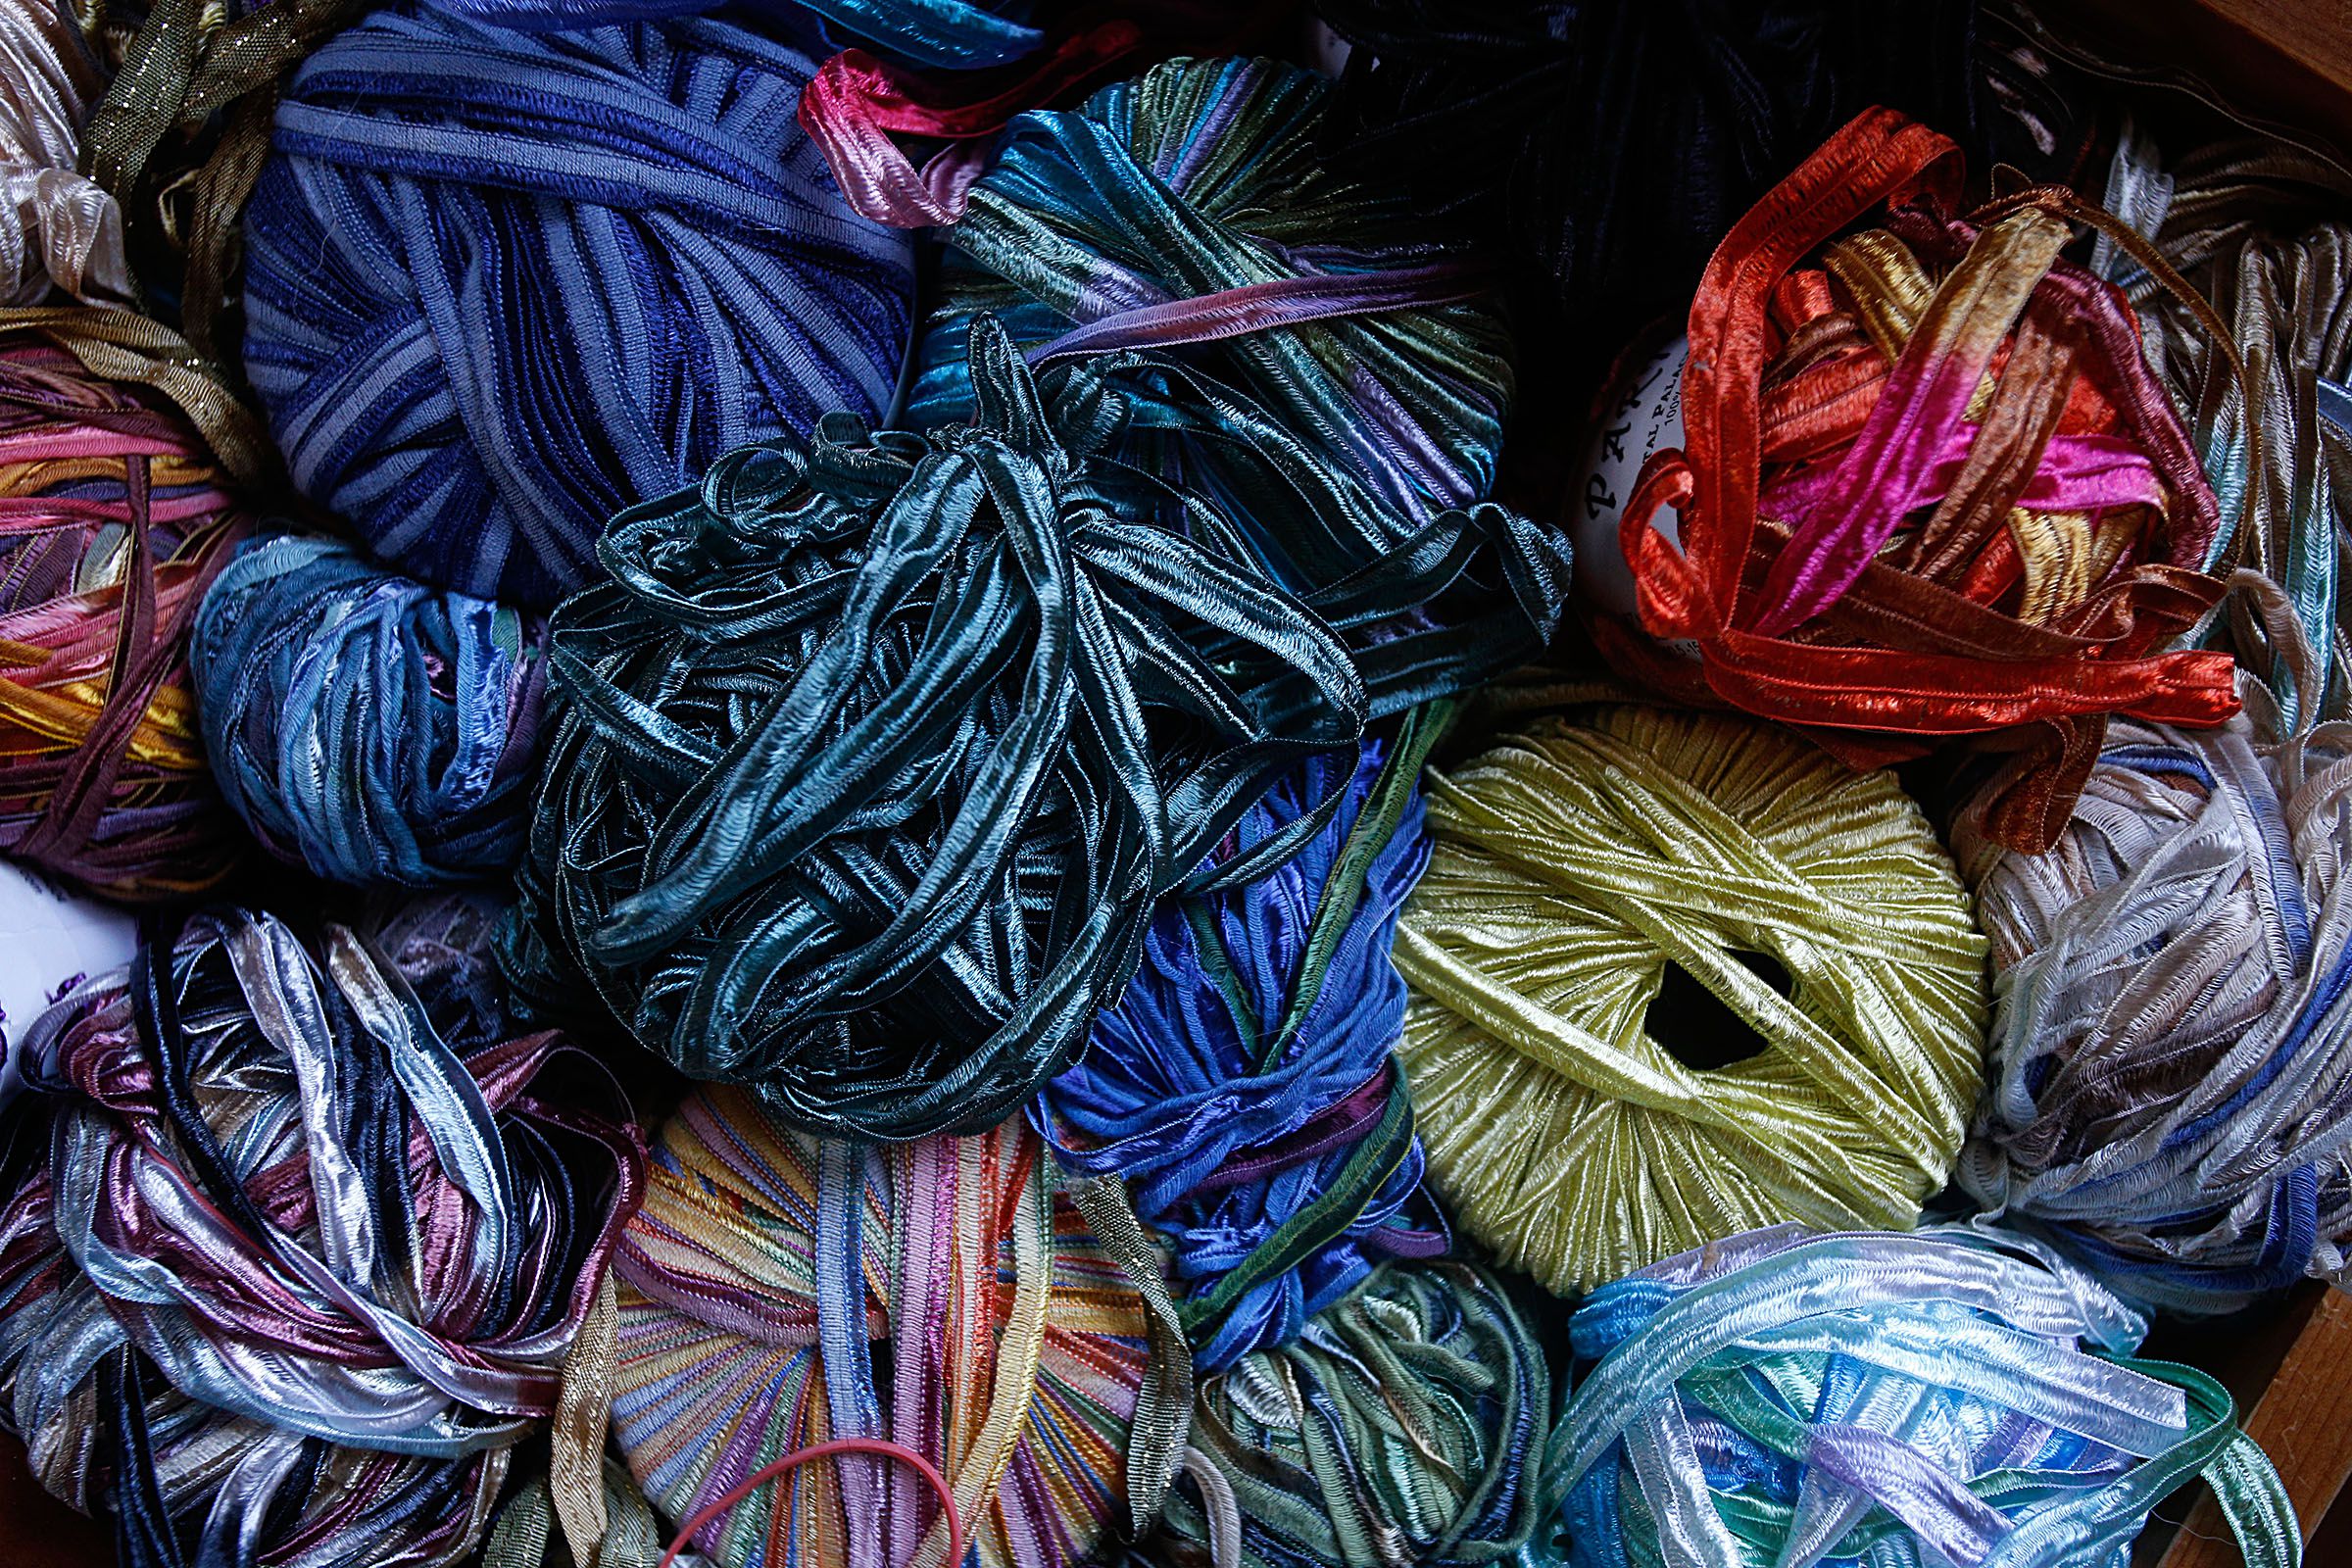 Carrie Cahill Mulligan's collection of nylon, rayon and silk yarn used for decorative embroidery at her home studio in Canaan, N.H., on November 18, 2016, for the handknit hats she sells. (Valley News - Geoff Hansen) Copyright Valley News. May not be reprinted or used online without permission. Send requests to permission@vnews.com.